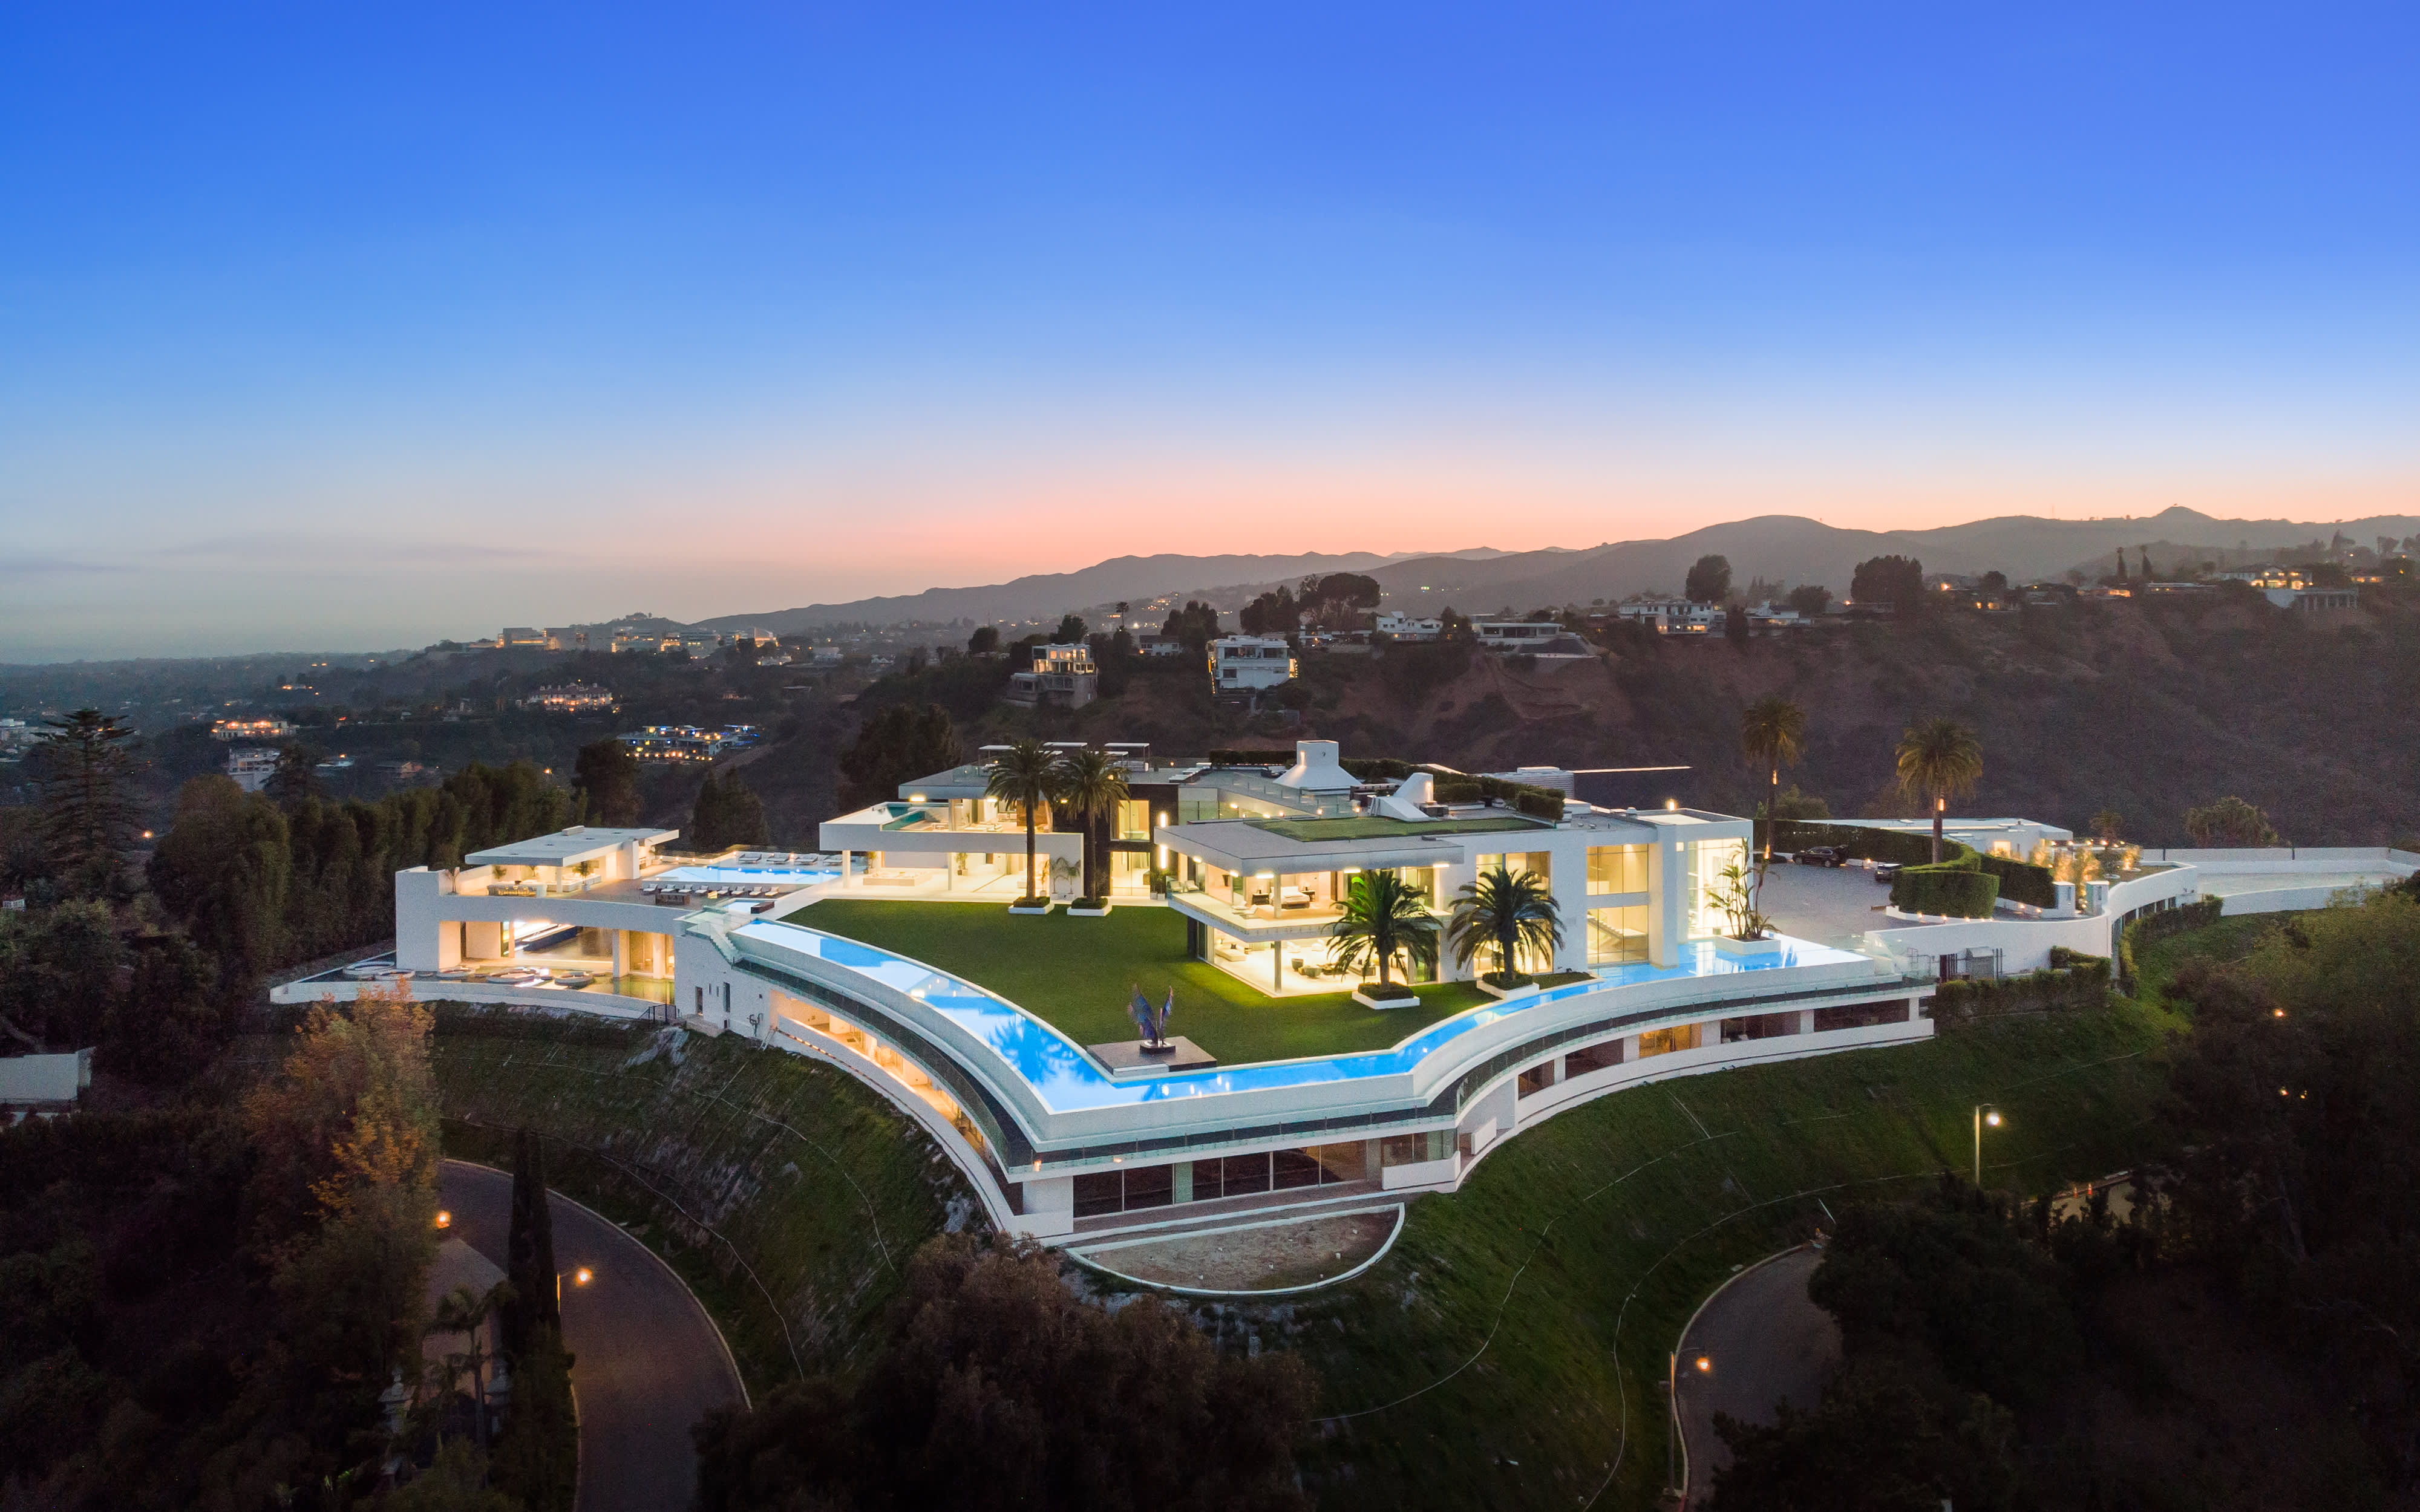 Most expensive home in America lists for 295 million, may head to